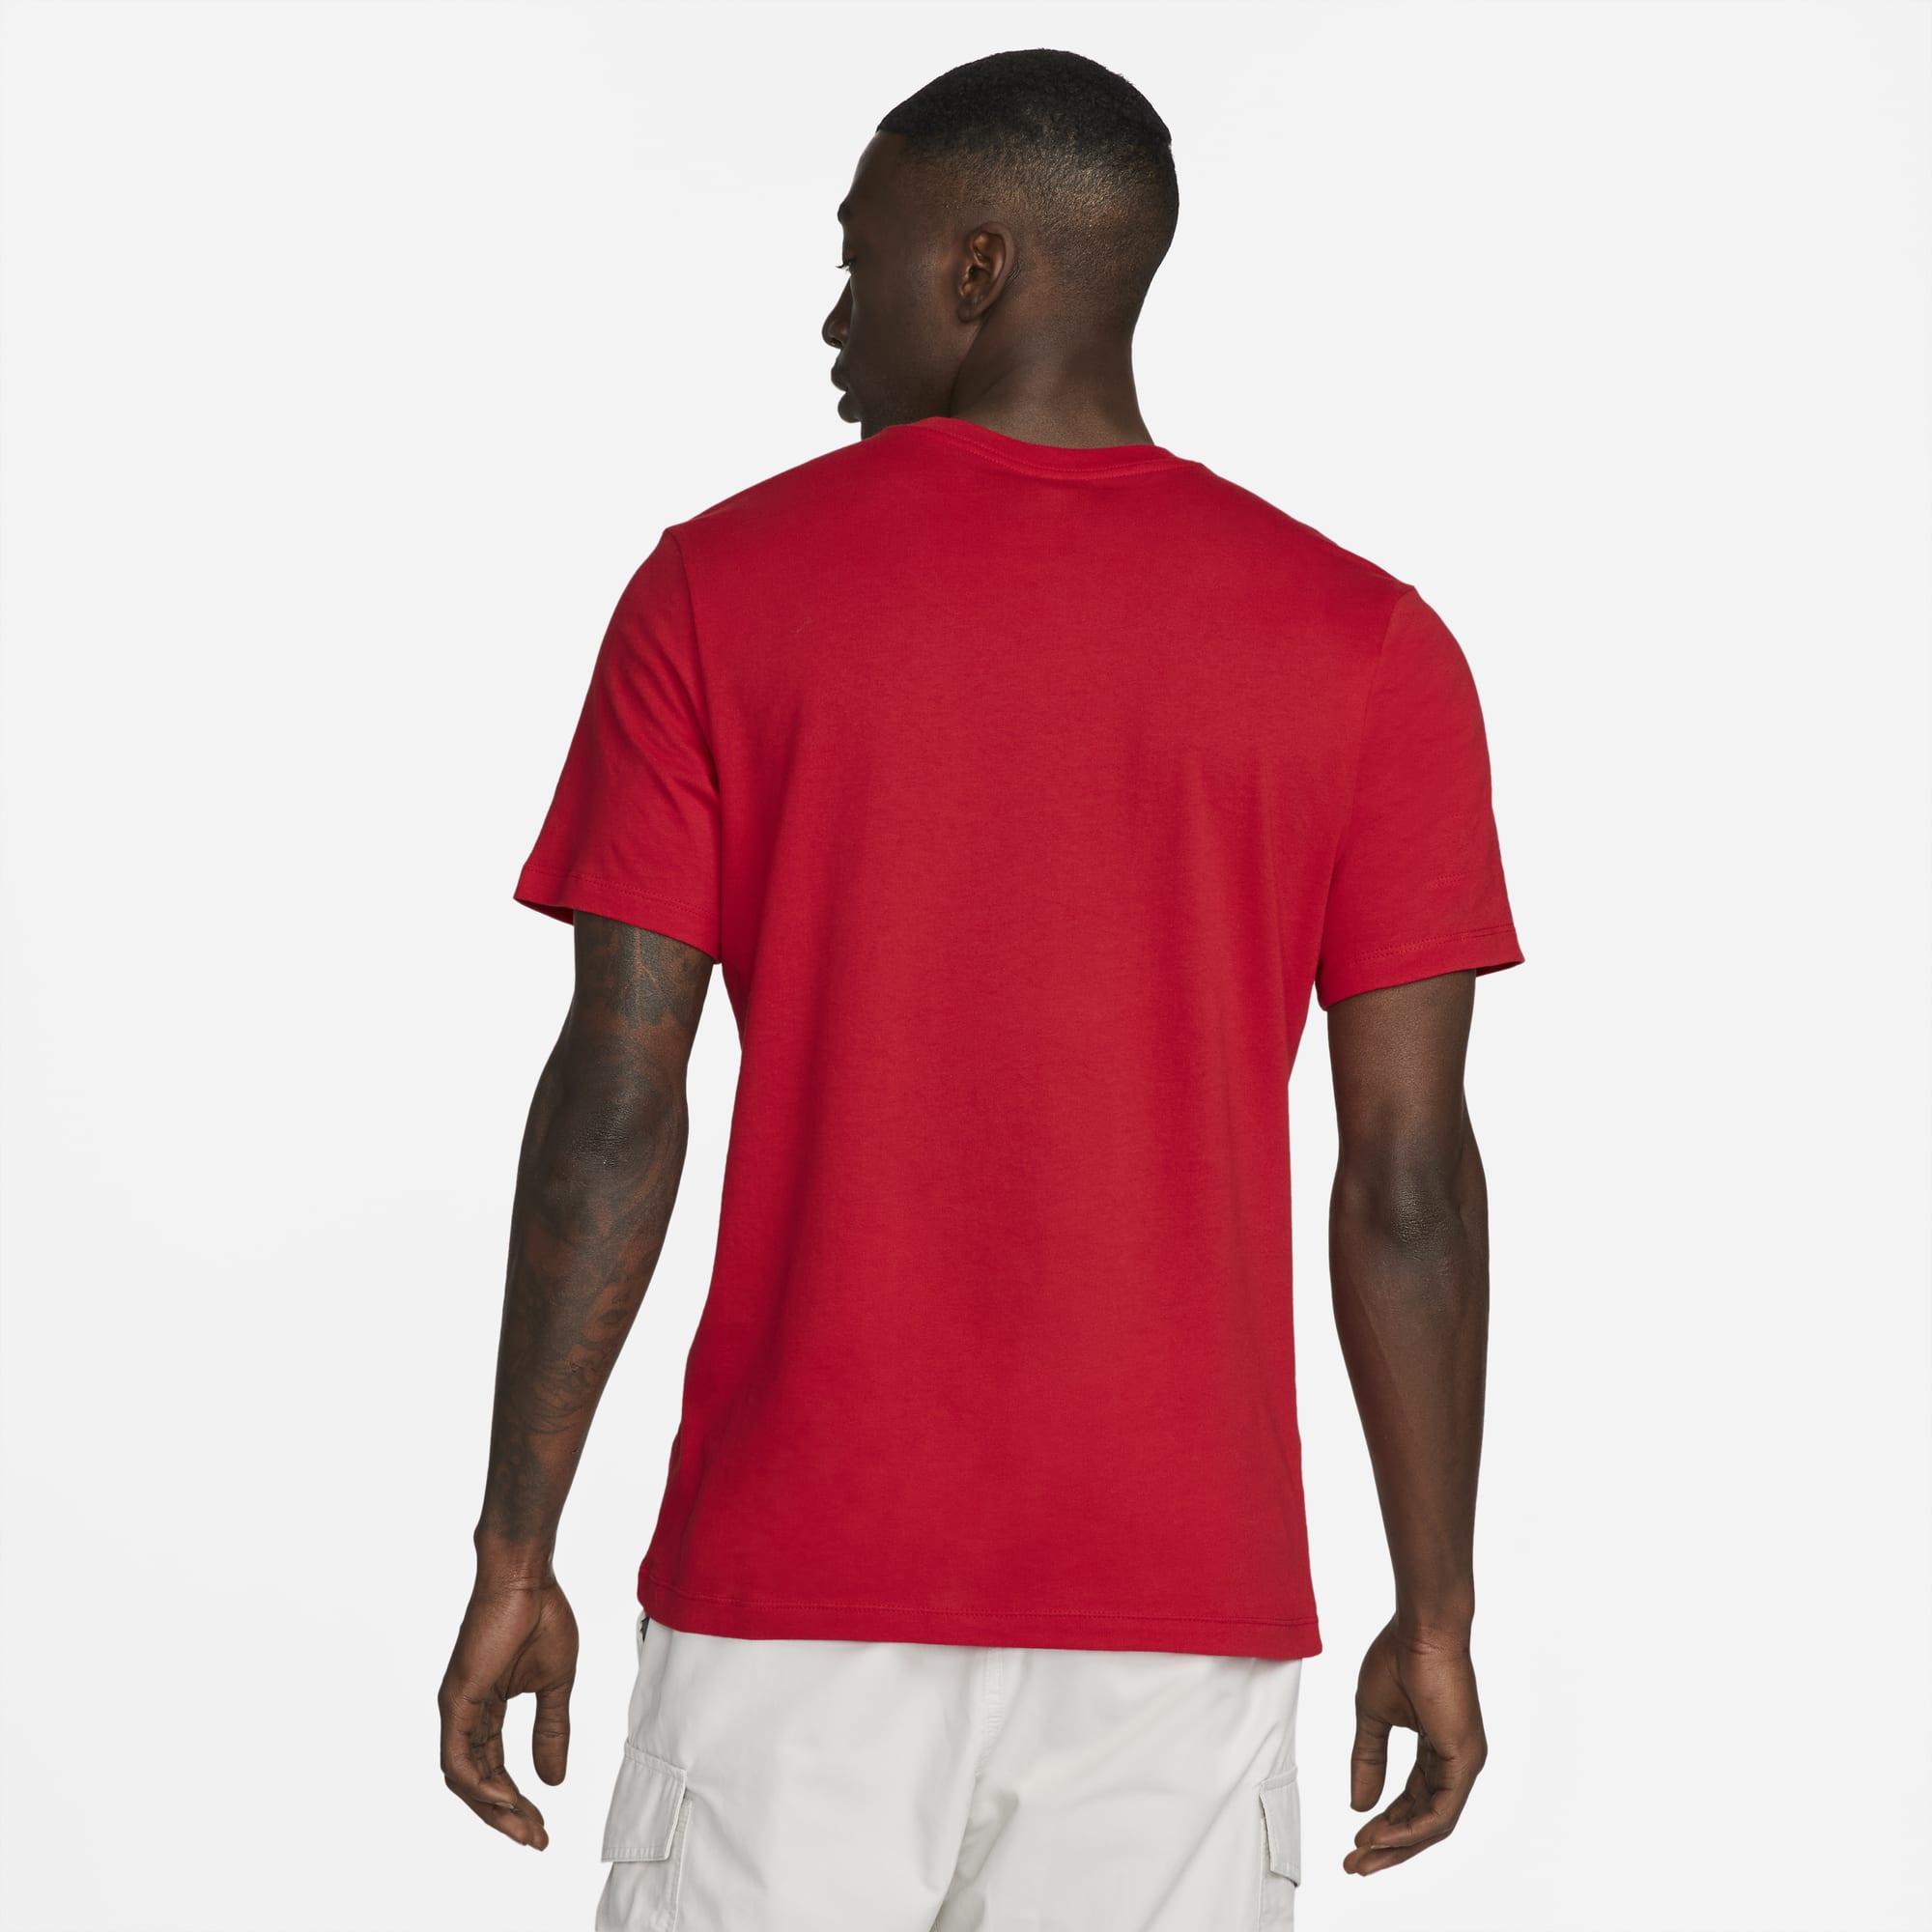 Nike Cotton Sportswear T-shirt in University Red (Red) for Men | Lyst